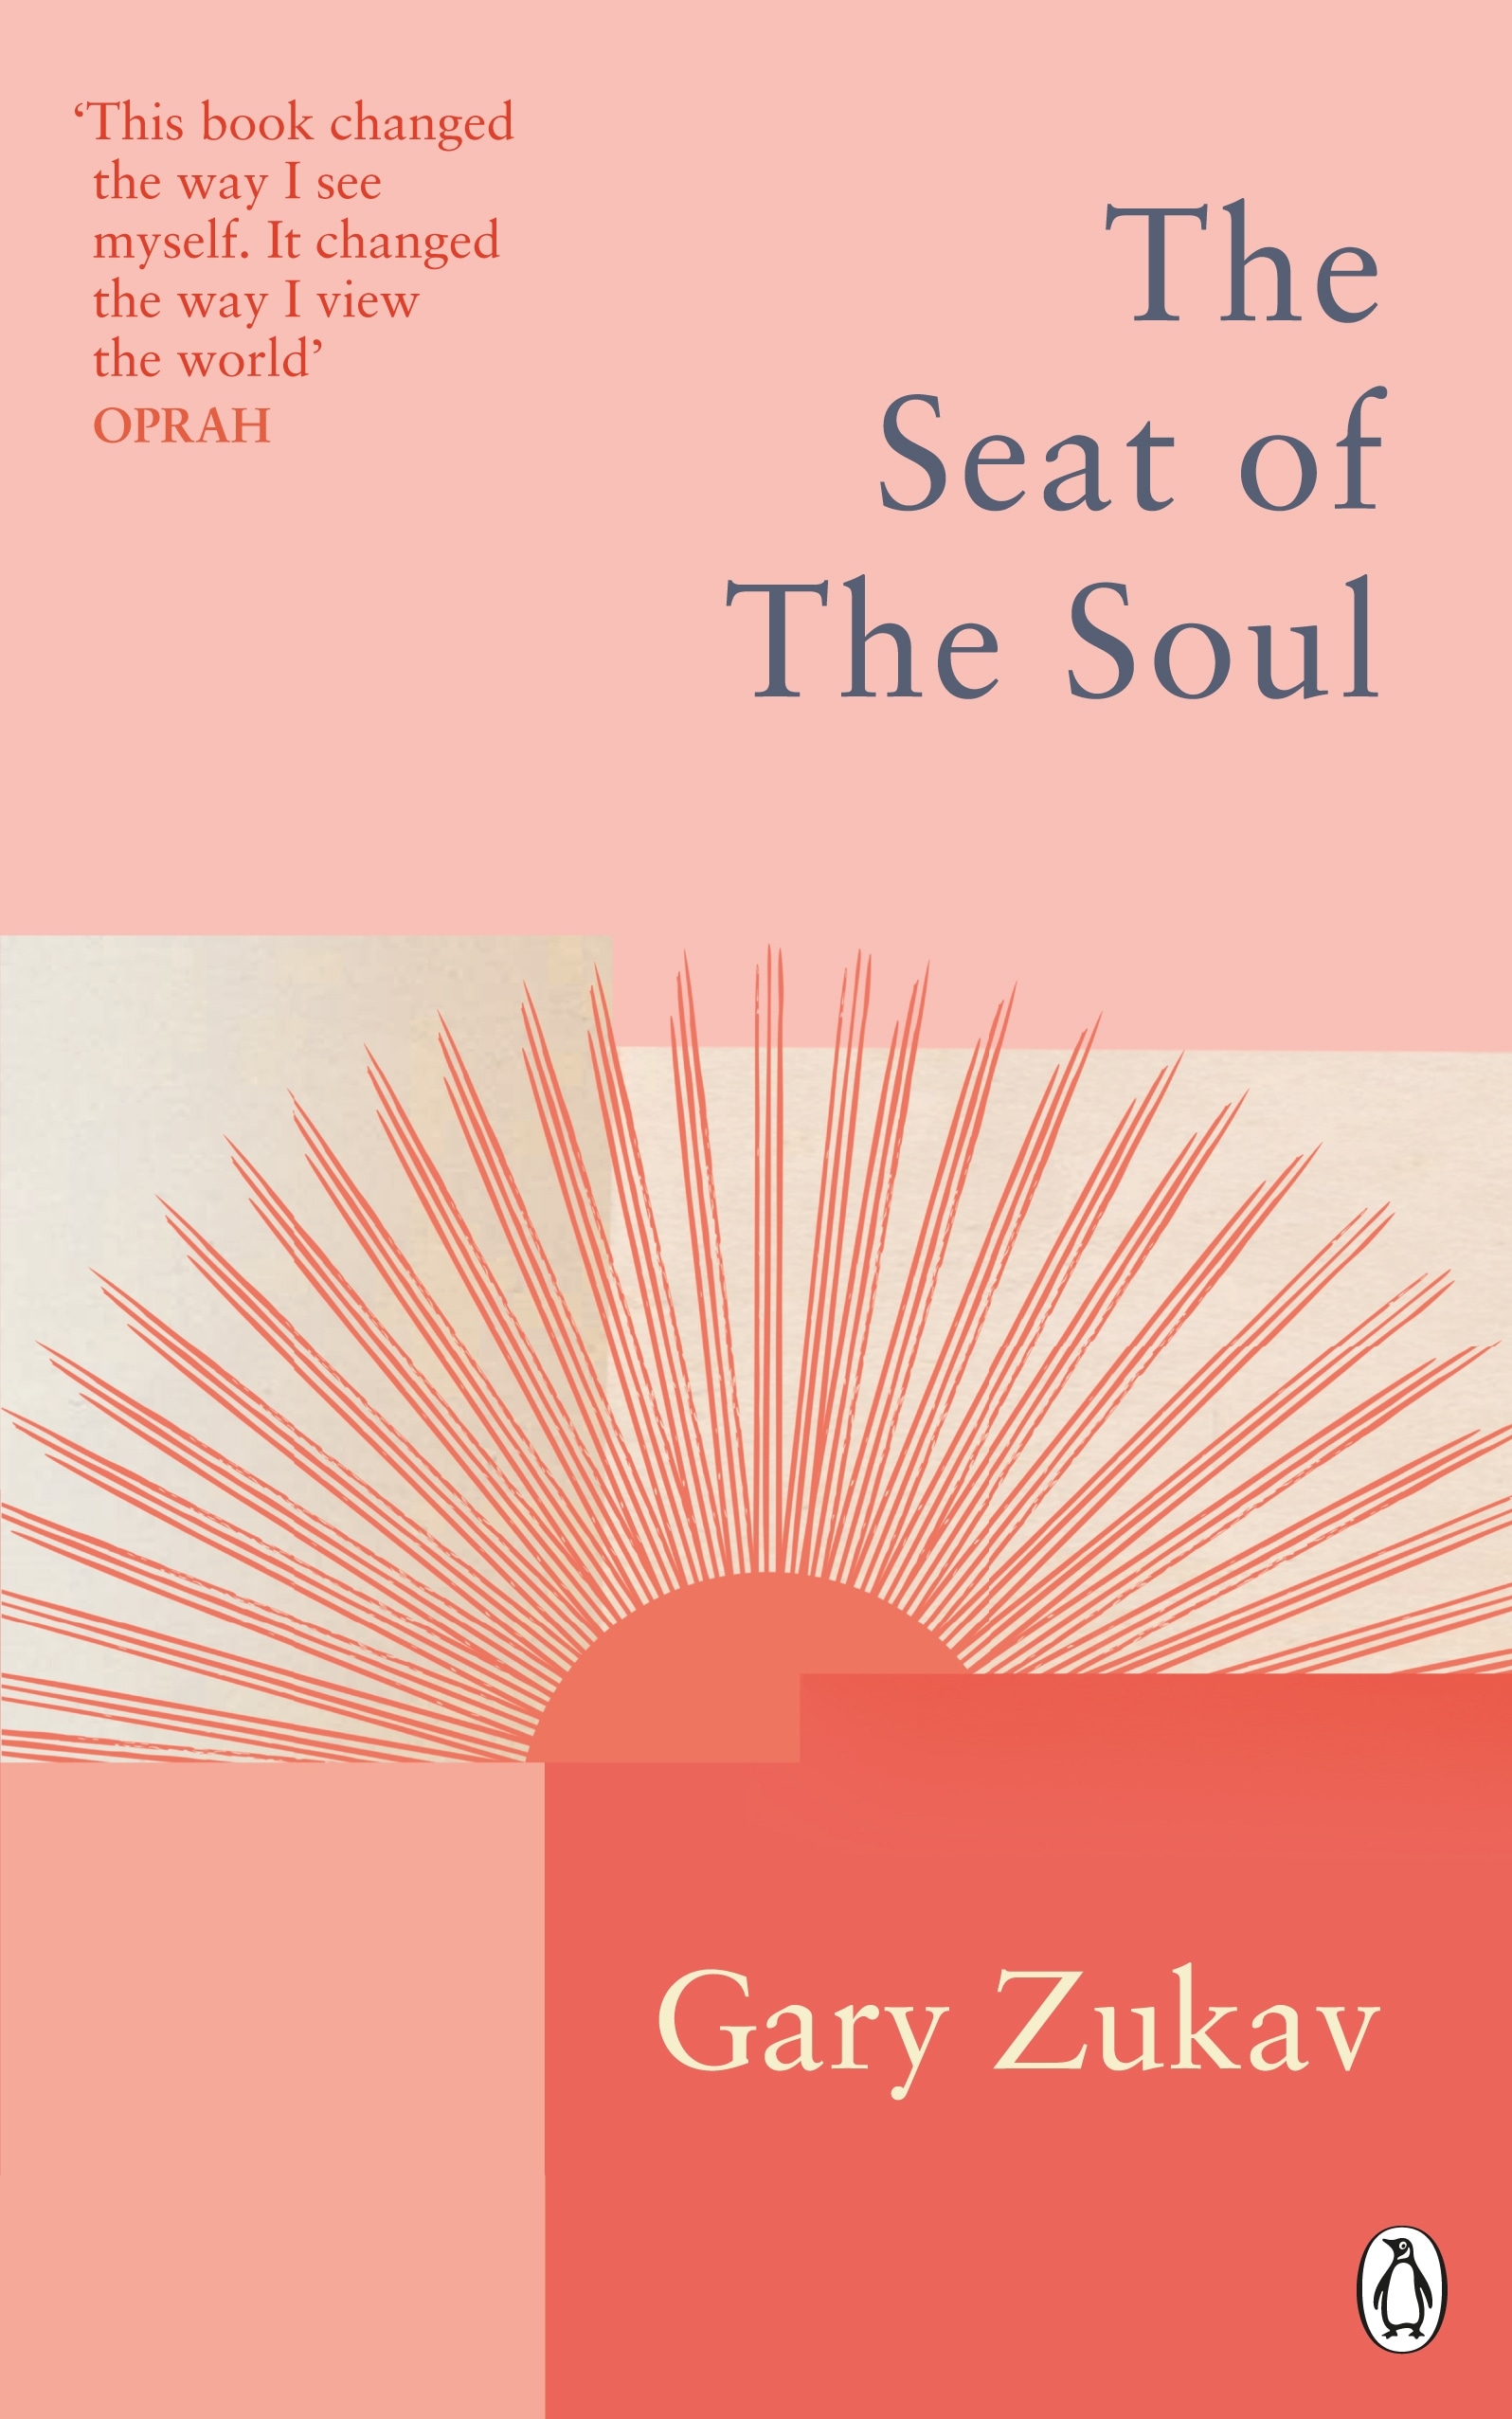 Book “The Seat of the Soul” by Gary Zukav — January 6, 2022